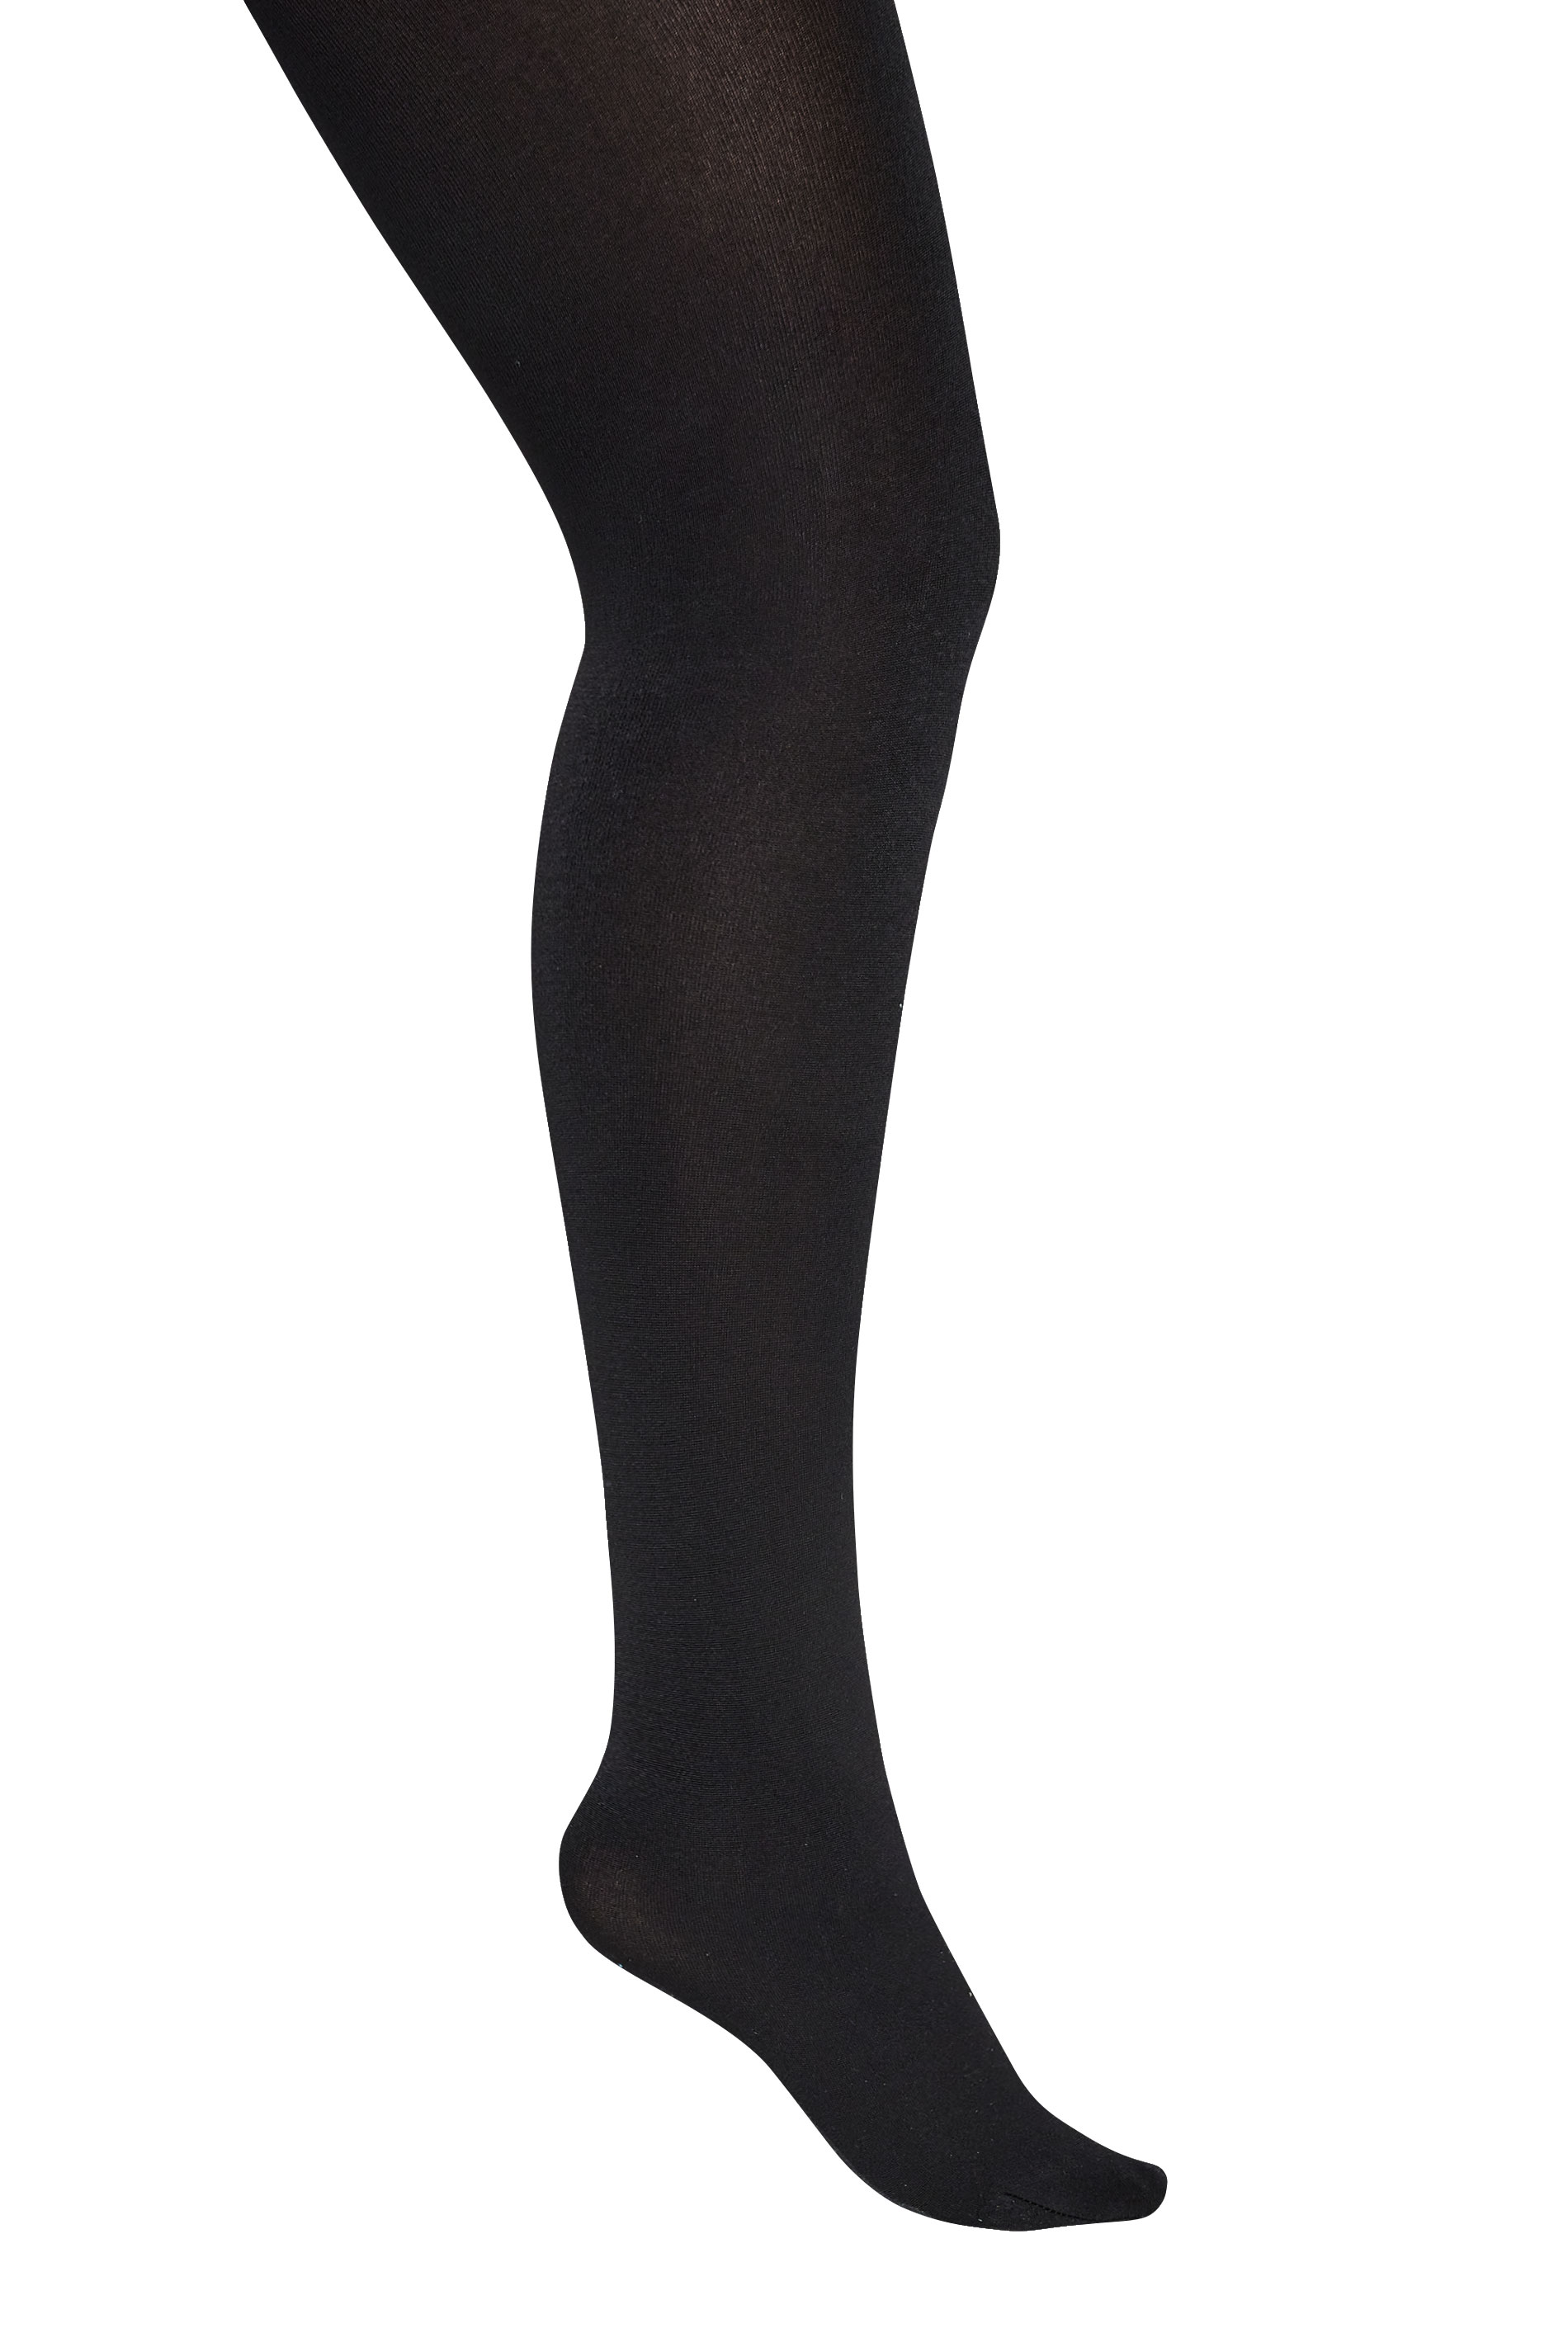 M&Co Black Thermal Fleece Tights | M&Co 3